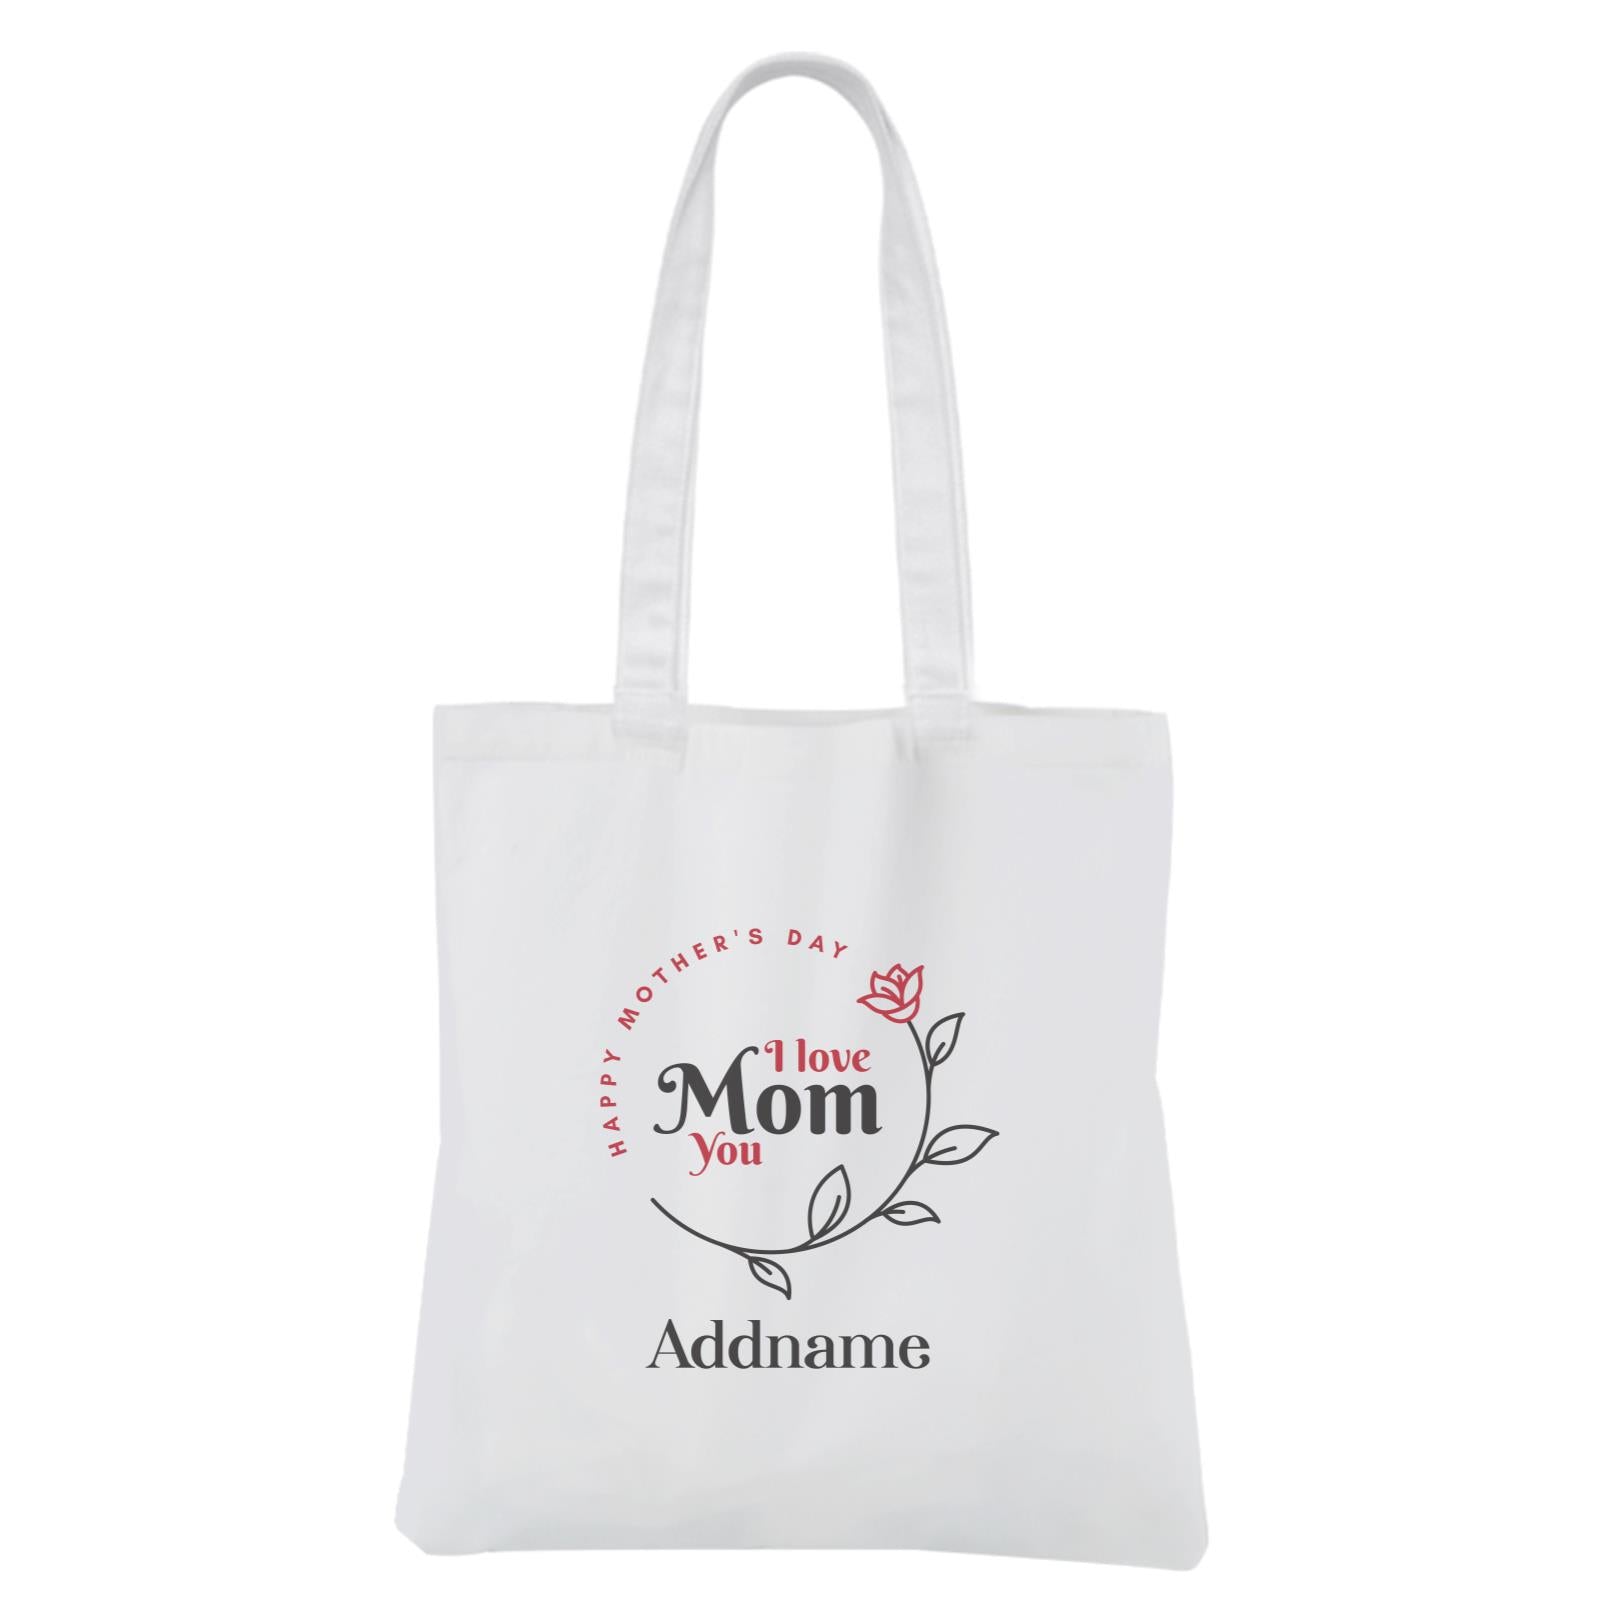 [MOTHER'S DAY 2021] I Love You Mom White Canvas Bag